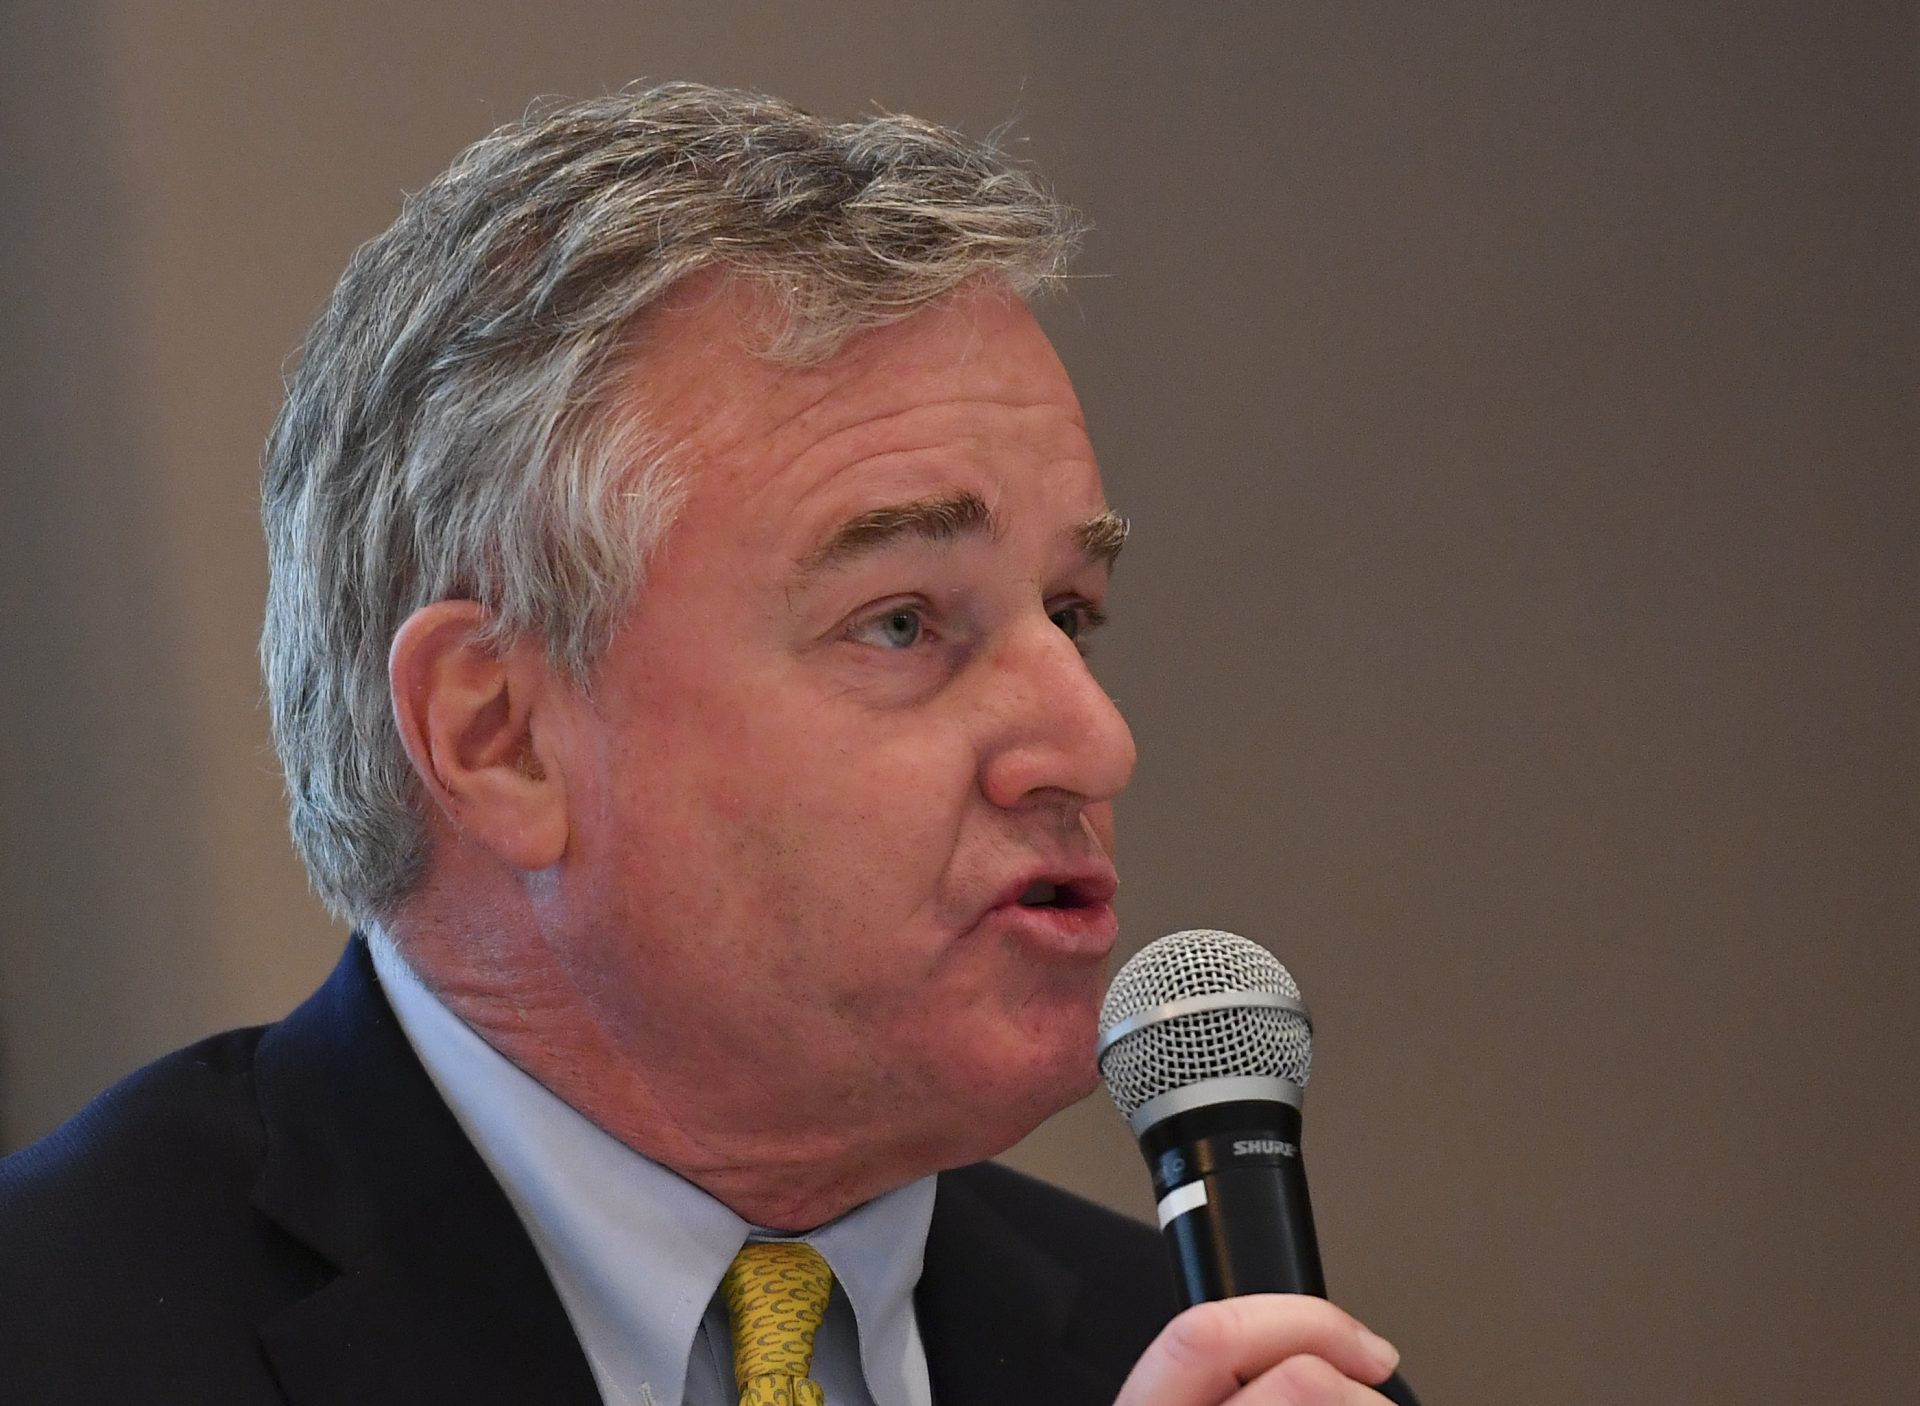 Rep. David Trone Issues An Apology After Using Racial Slur